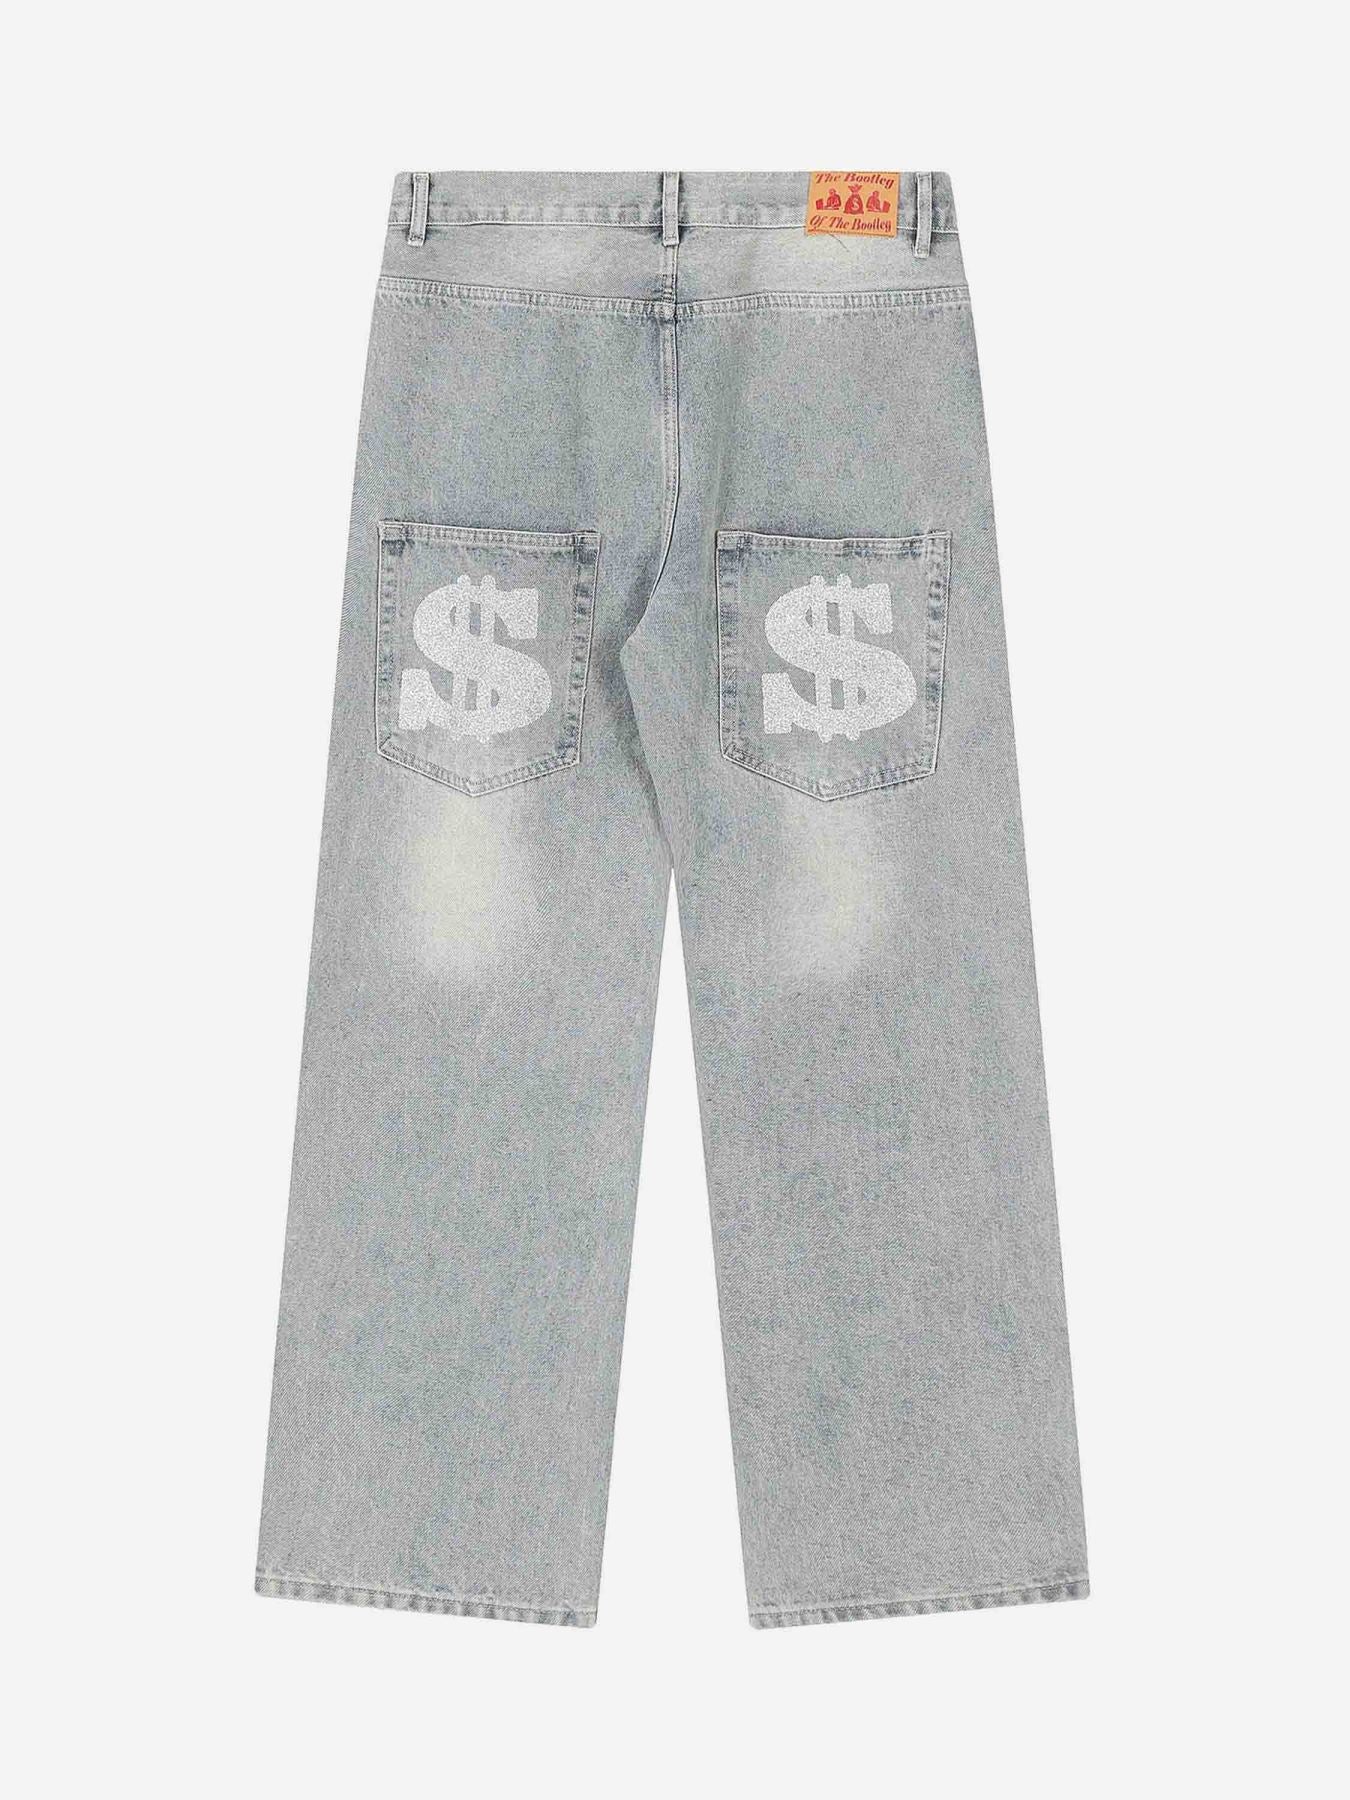 Thesupermade Dark Letter Print Jeans